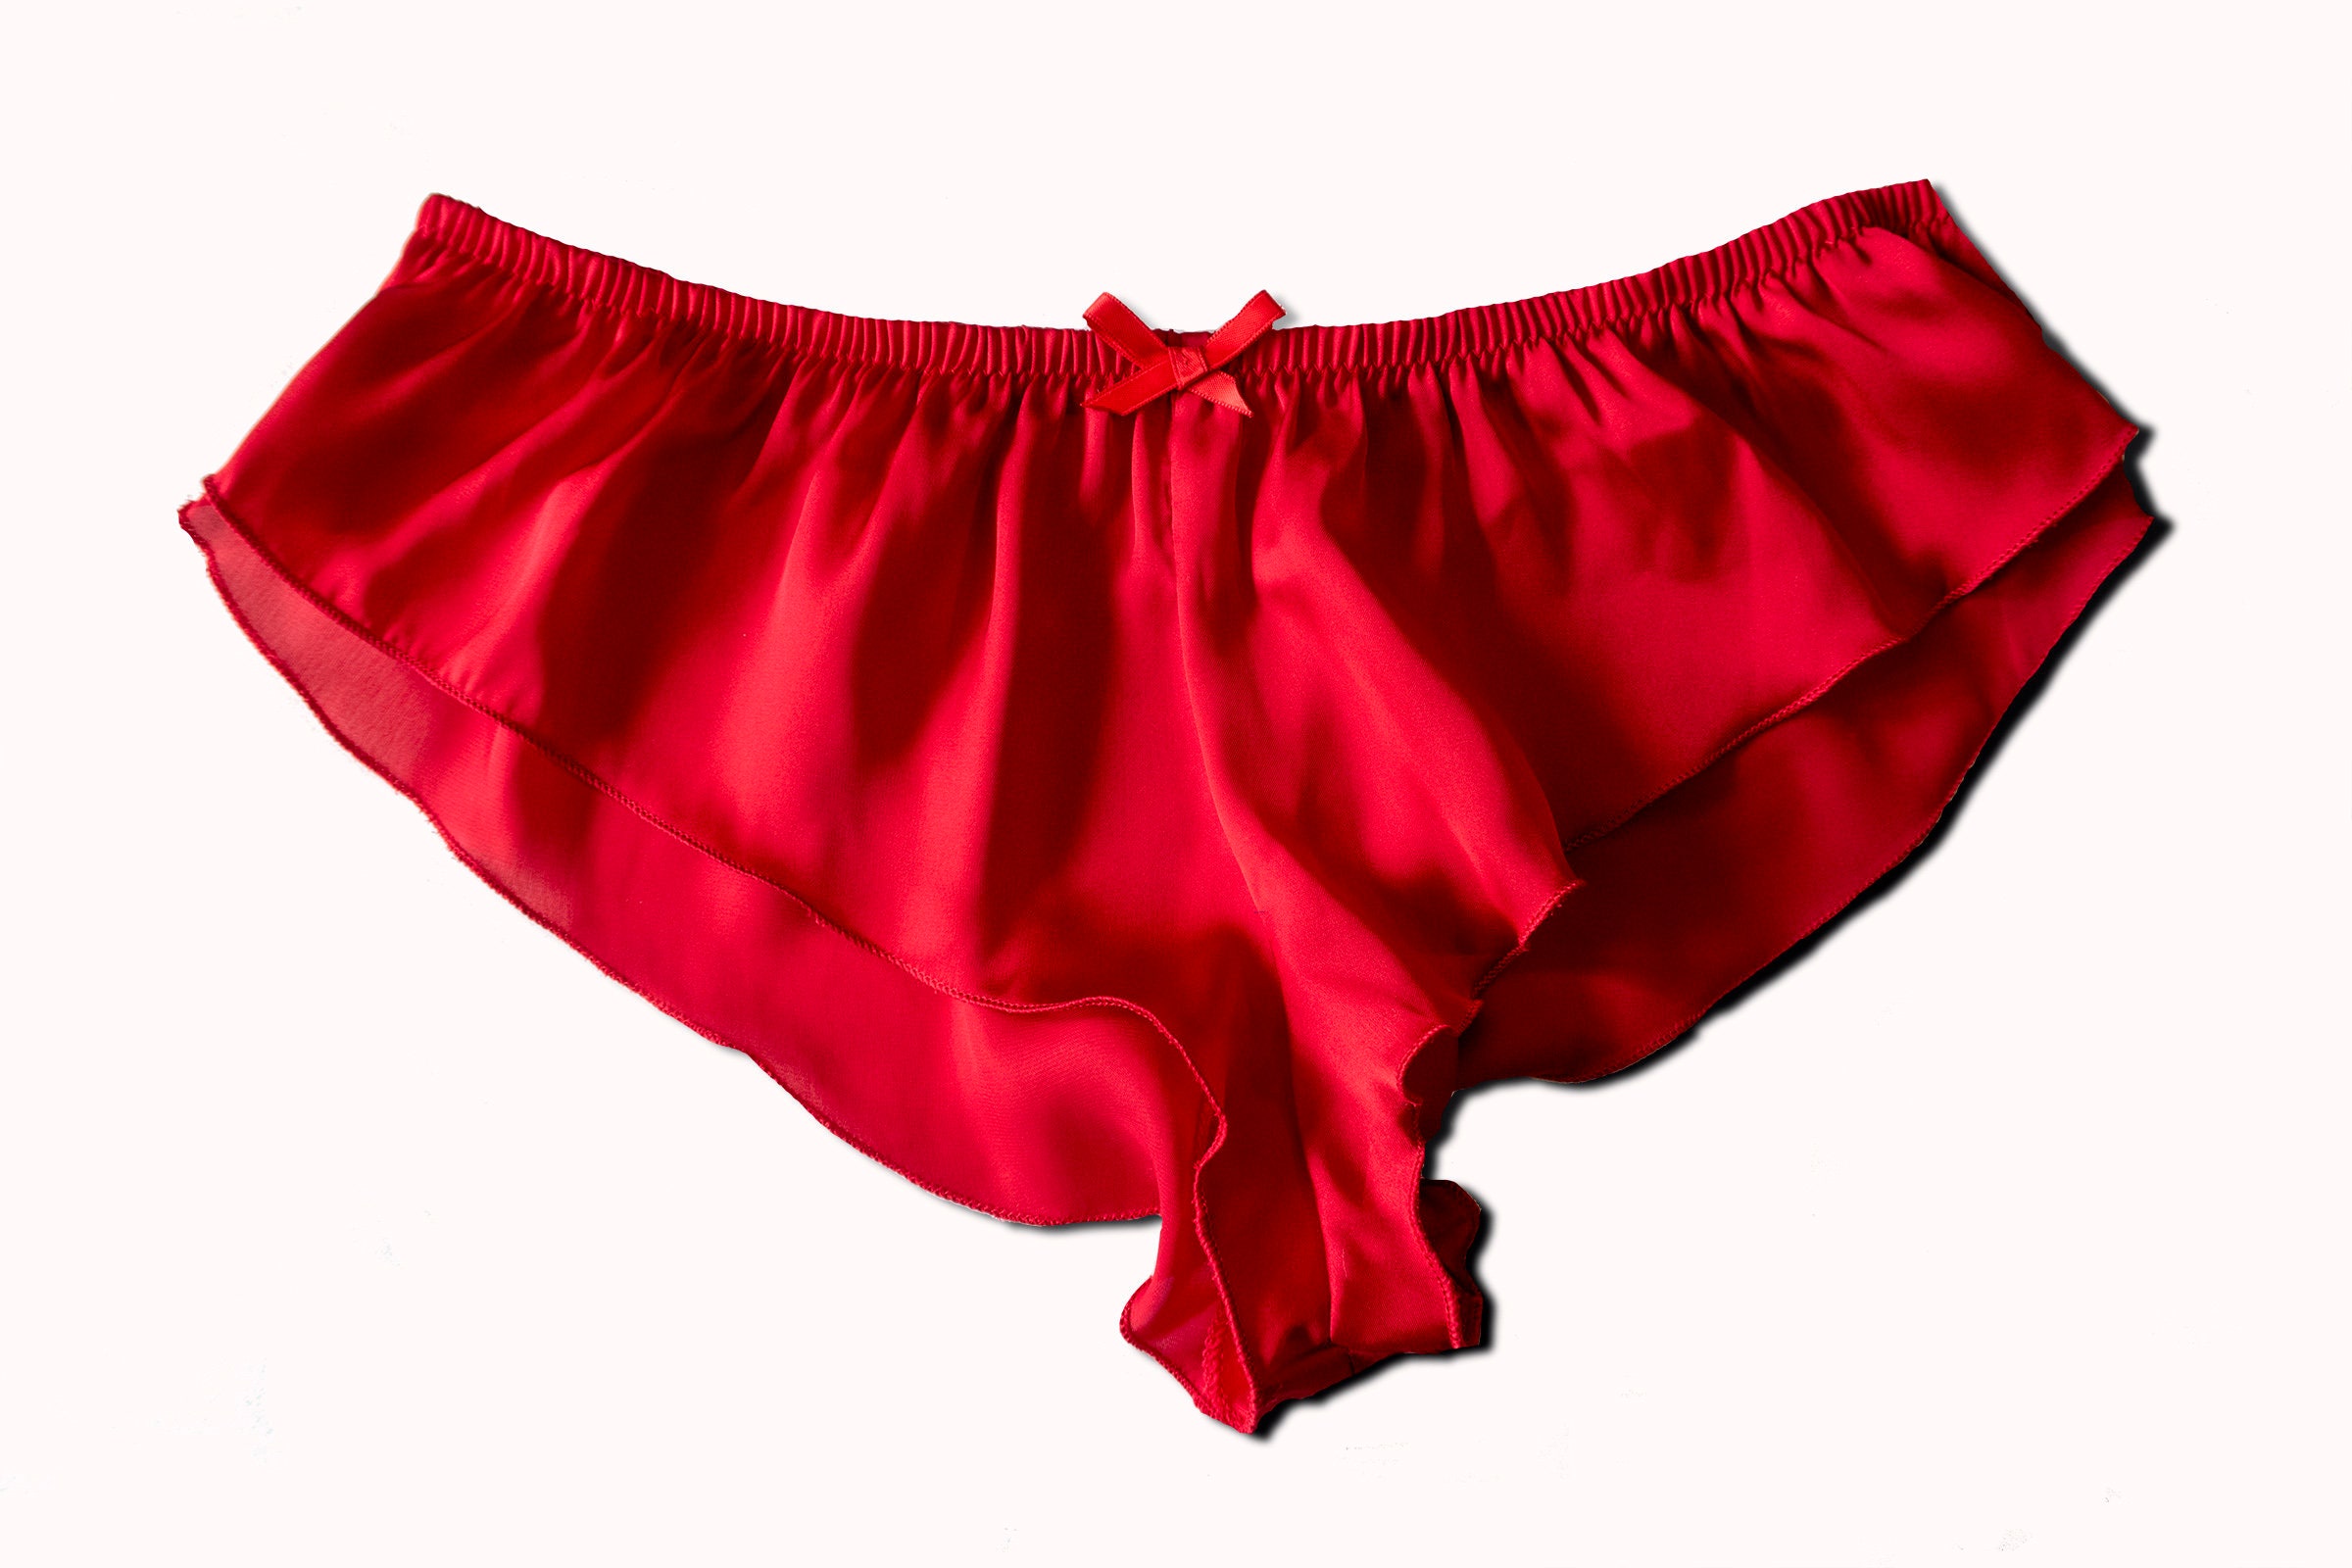 Silky Satin French Knickers Panties Black White Red Nude Ivory